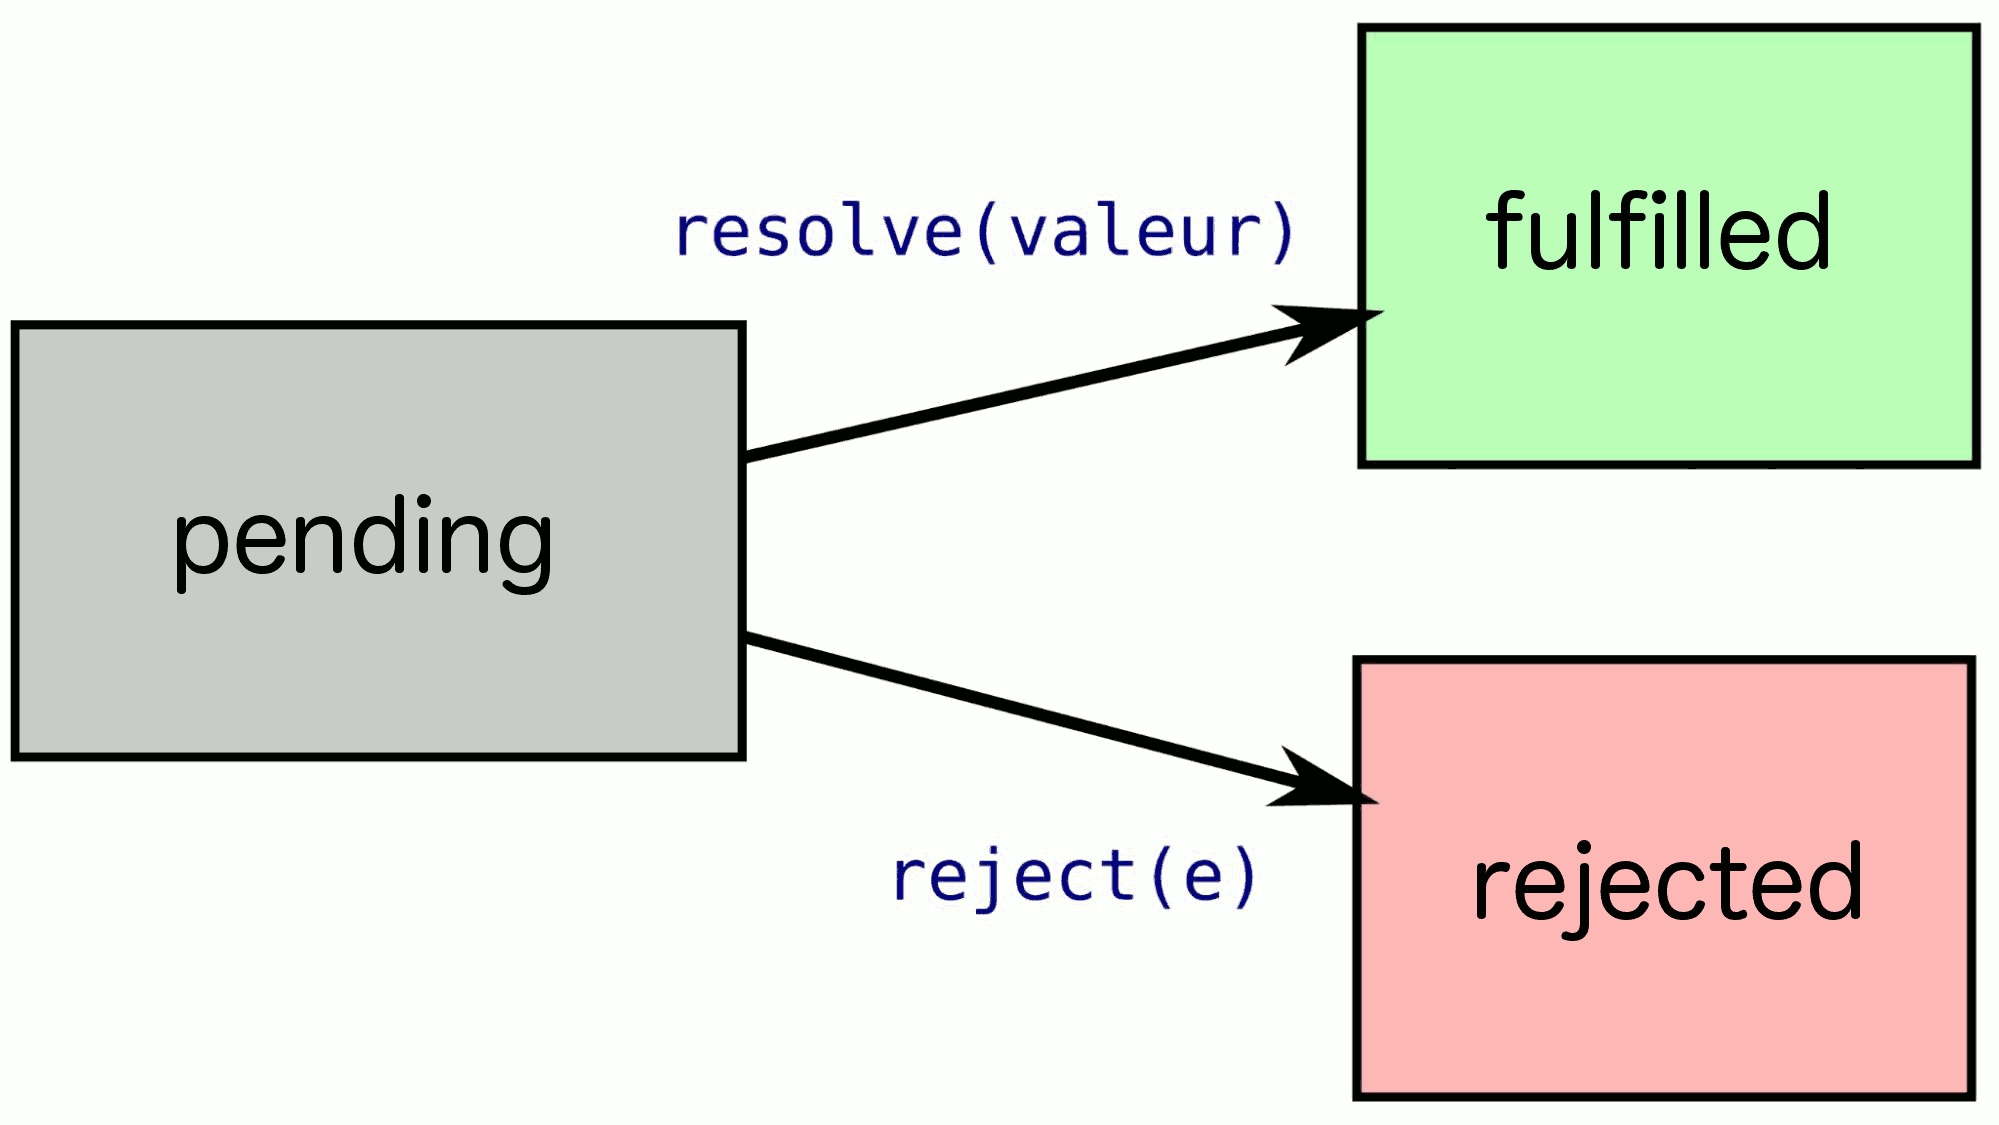 Schema representing Promise states: pending -> fulfilled|rejected